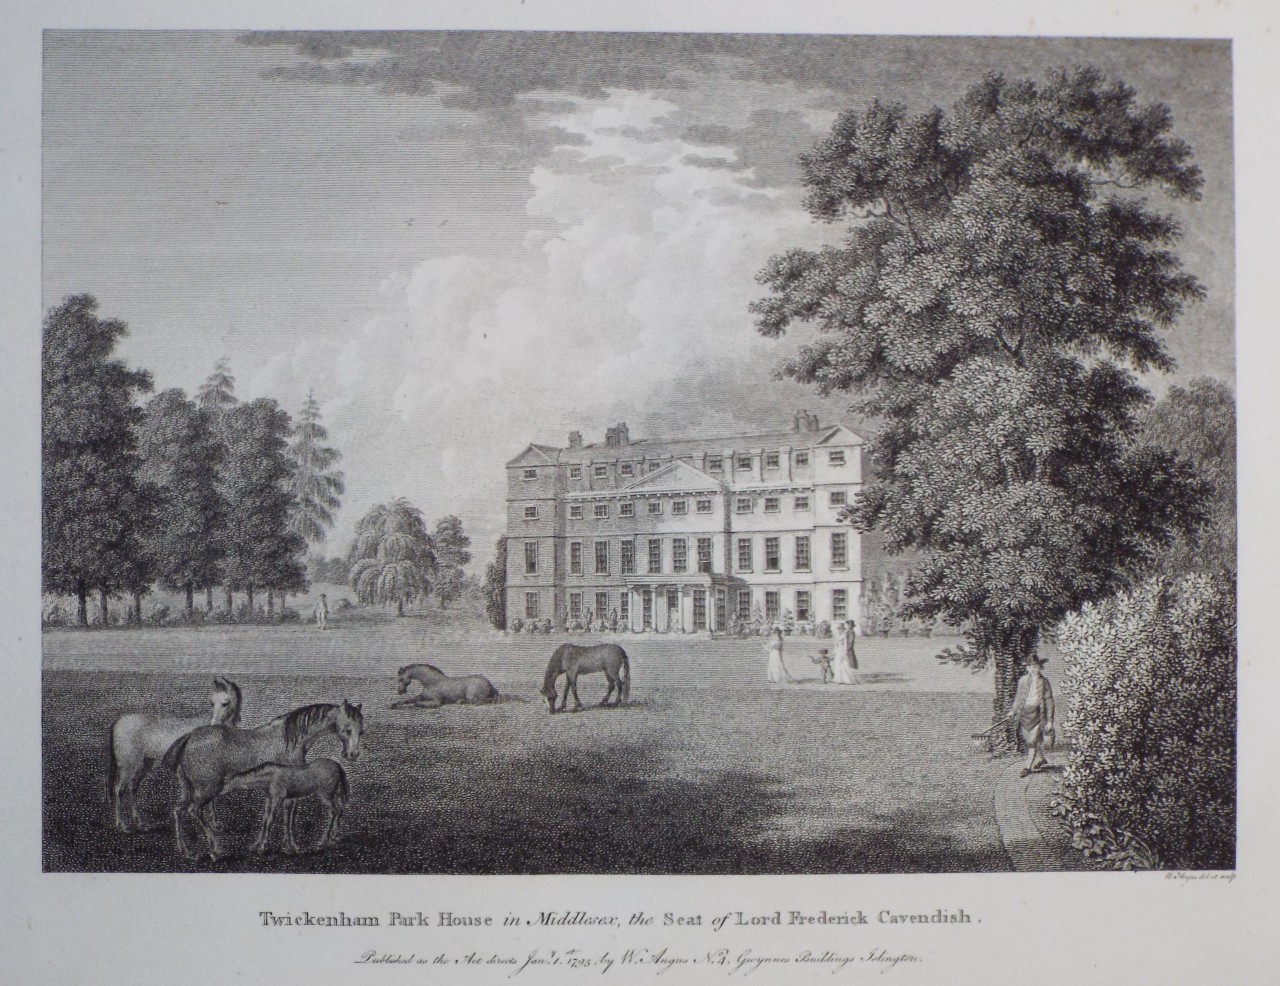 Print - Twickenham Park House in Middlesex, the Seat of Lord Frederick Cavendish. - Angus